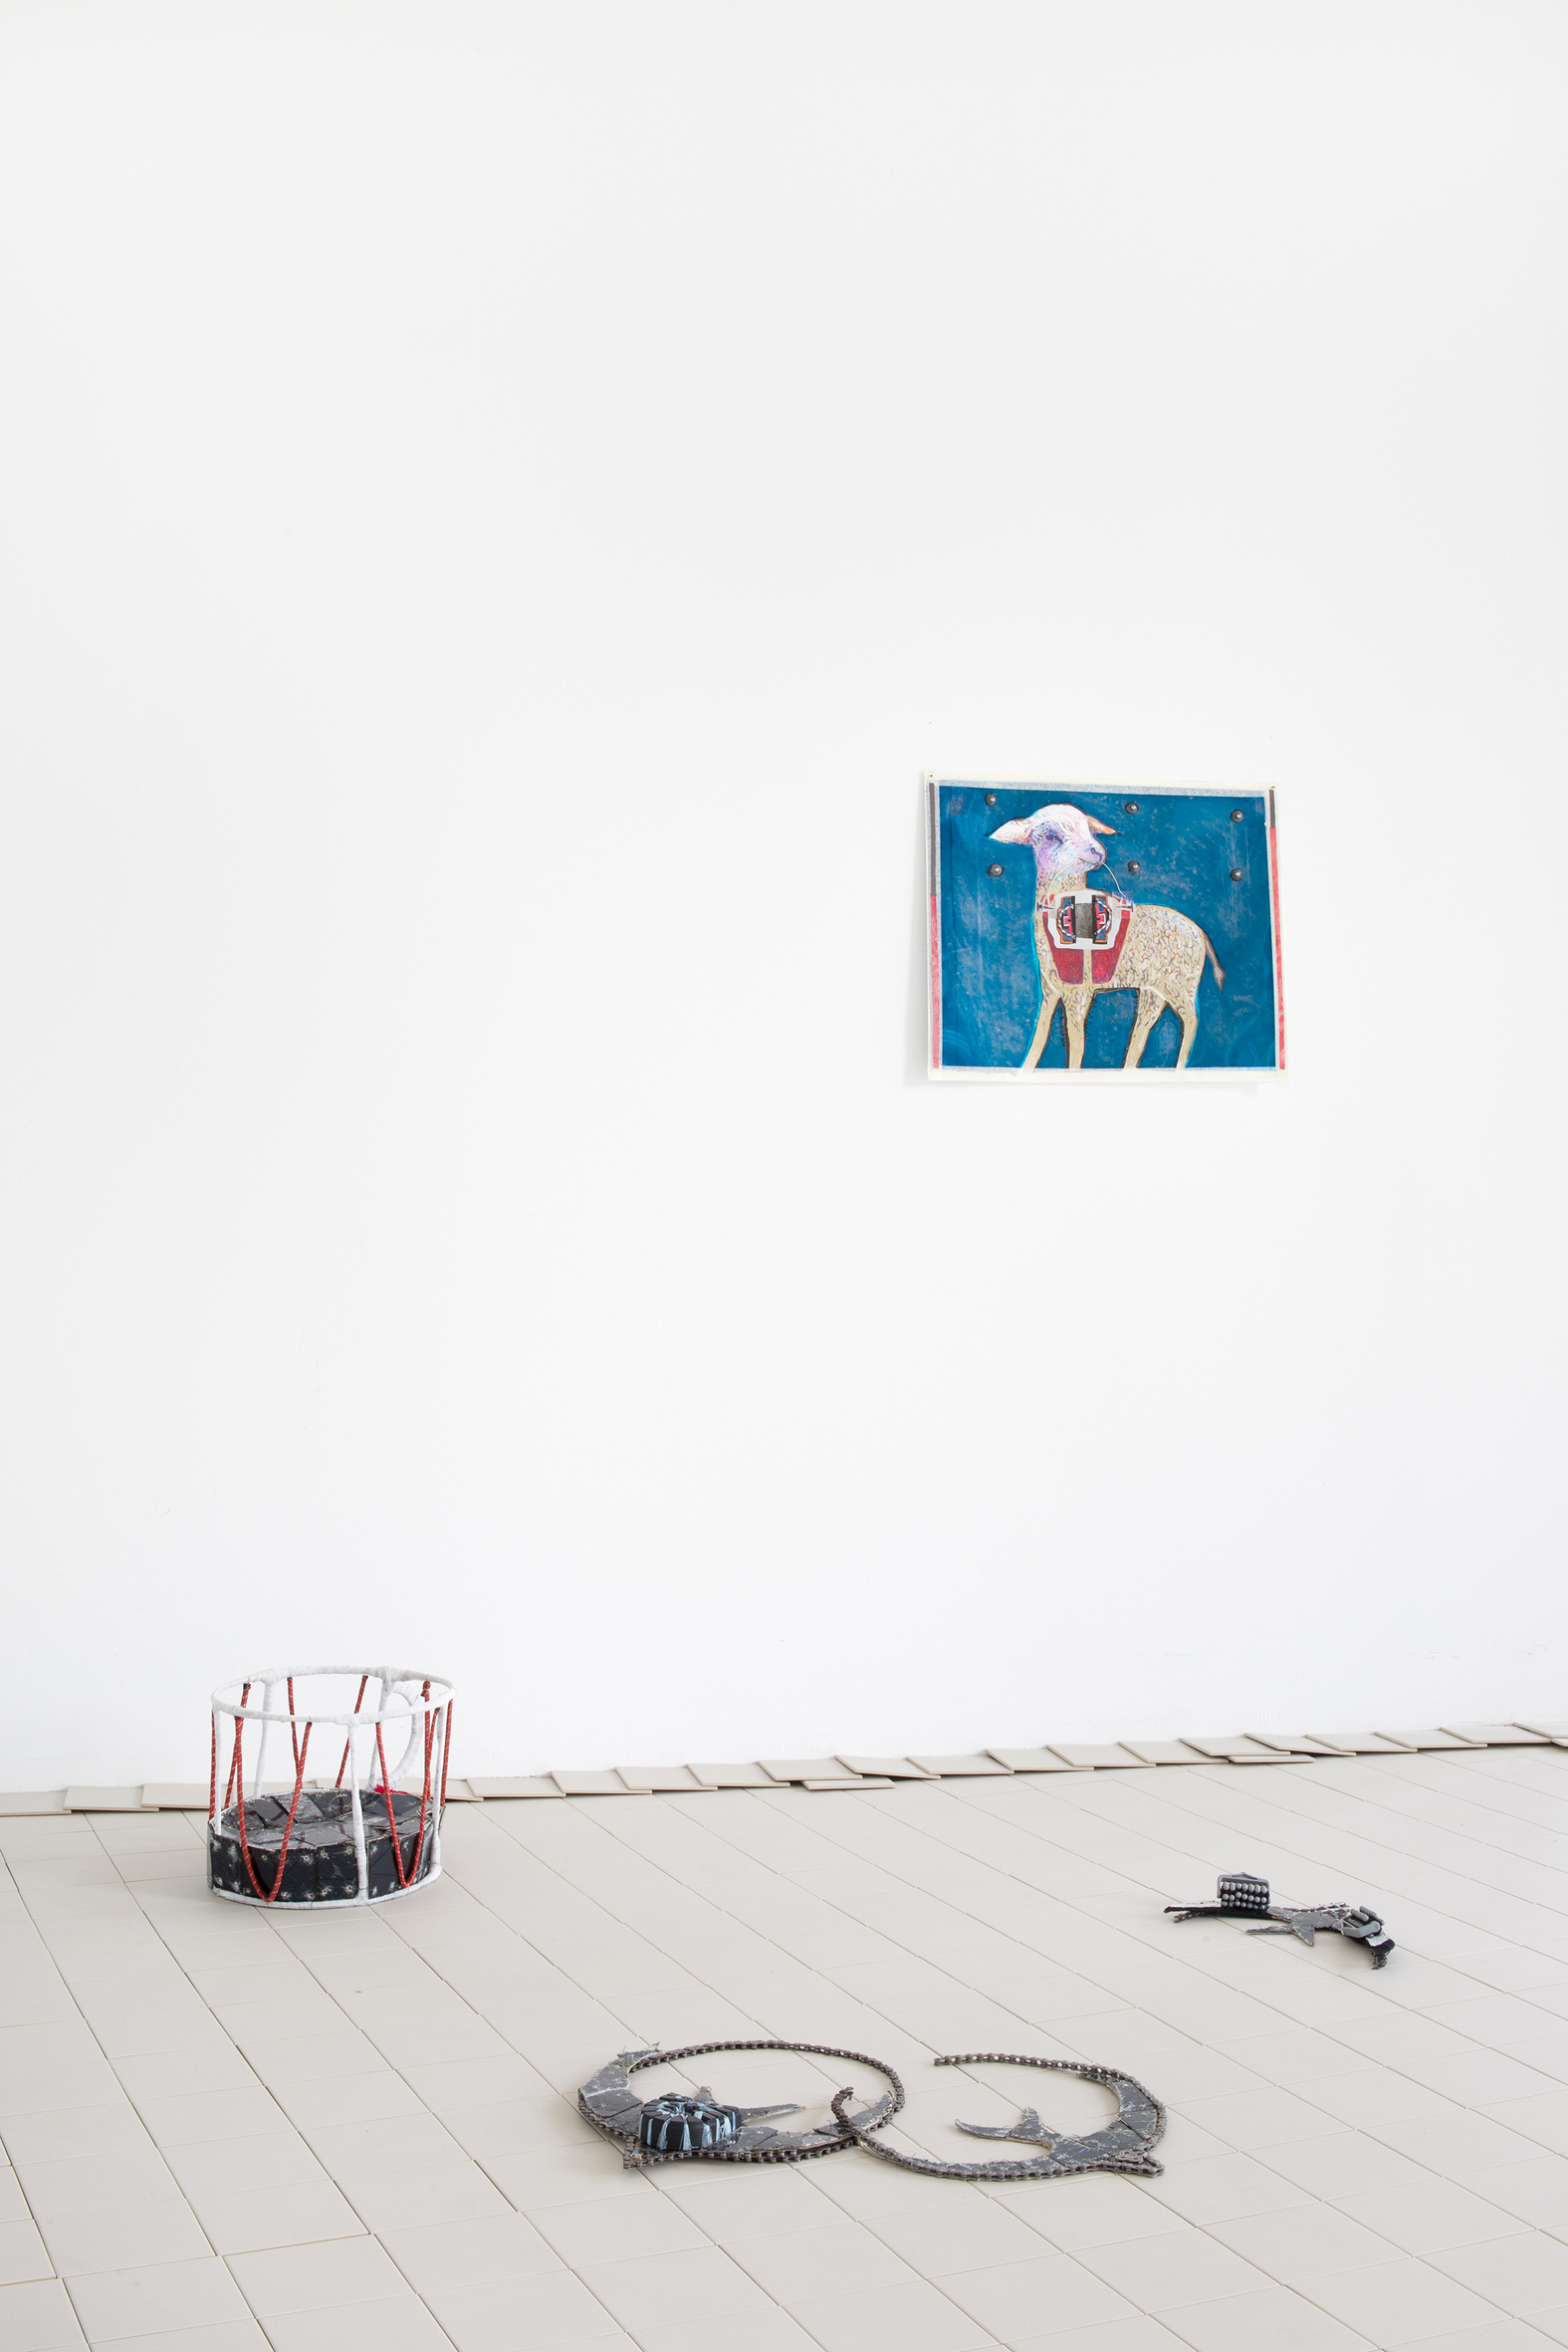 Wet Resistance, Dortmunder Kunstverein, 2022 Anna Solal, Untitled (drawing), 2022 & Cup with stains, 2018 various materials Photo: Jens Franke  Courtesy: the artist, New Gallery, Paris & Trampoline Association